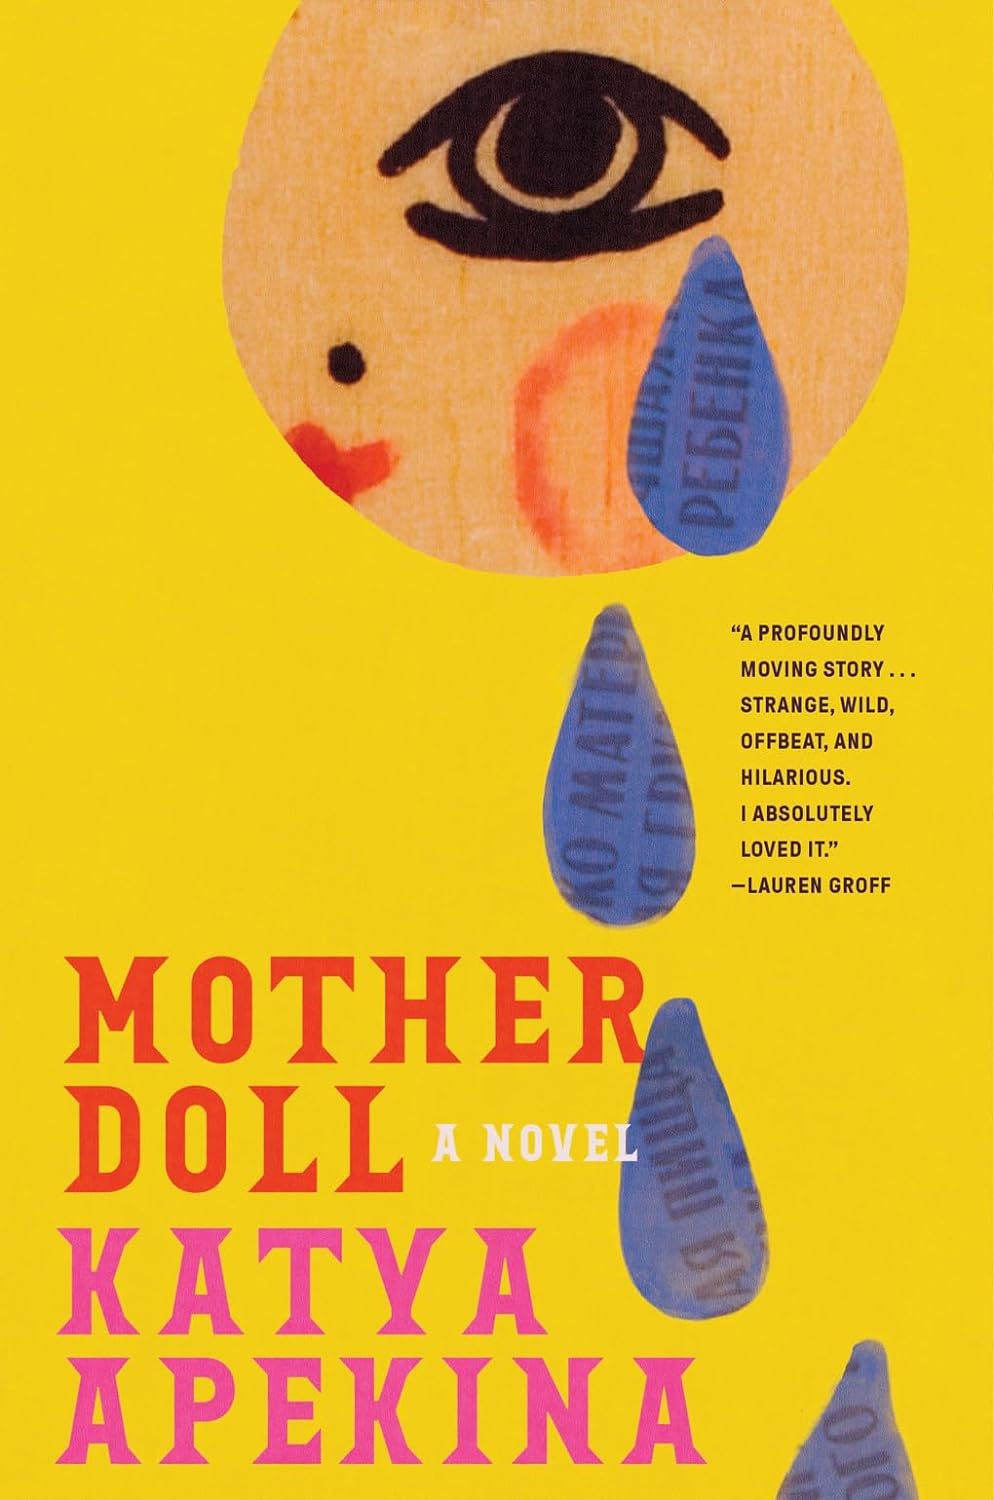 The cover of Mother Doll